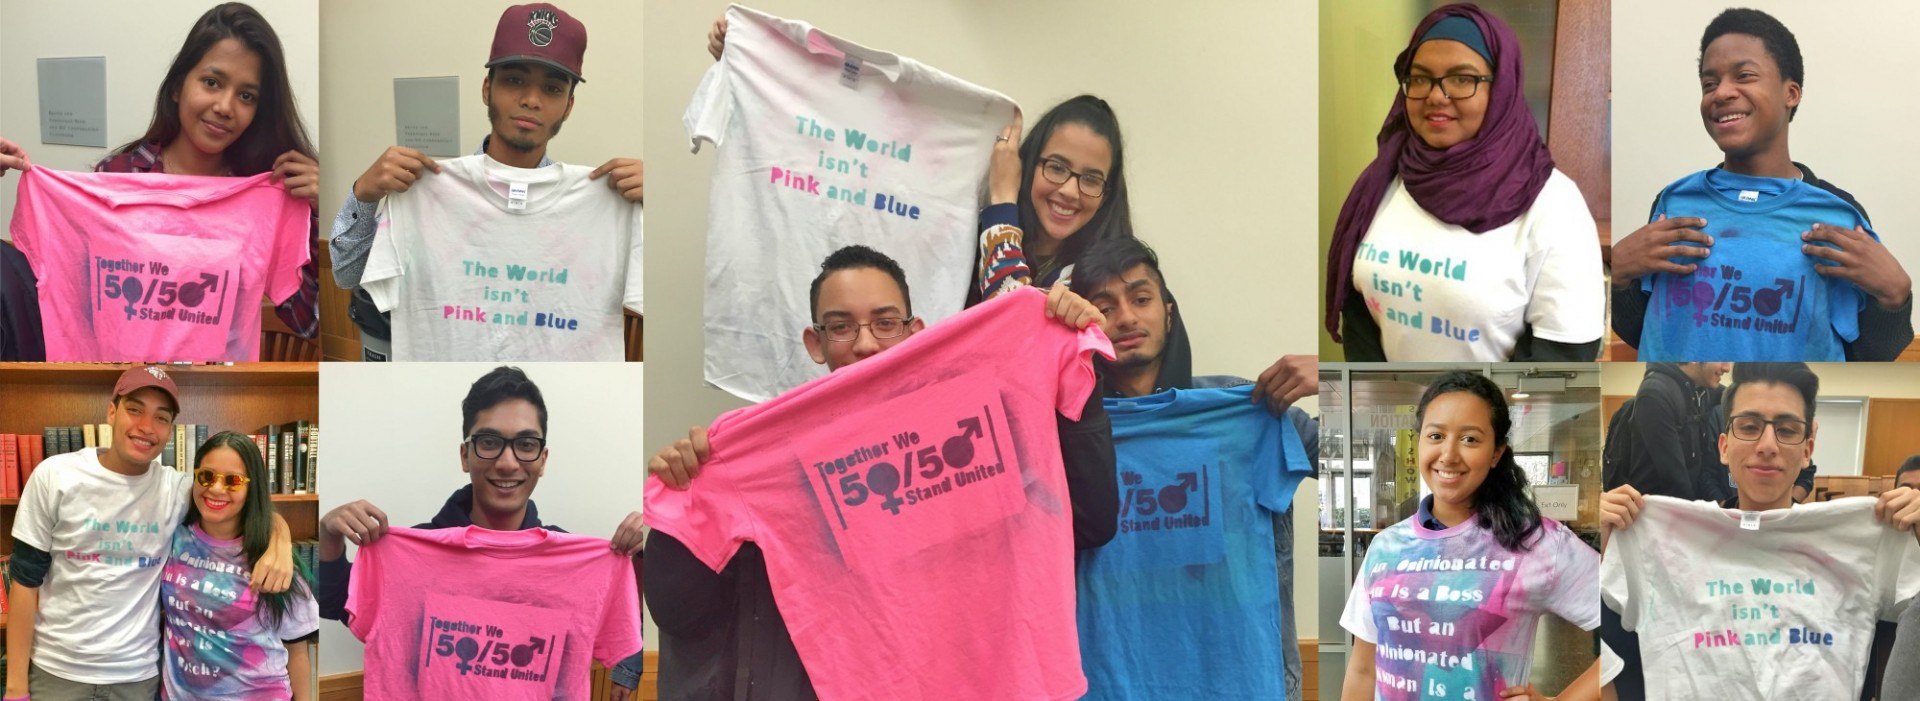 Students holding t-shirts